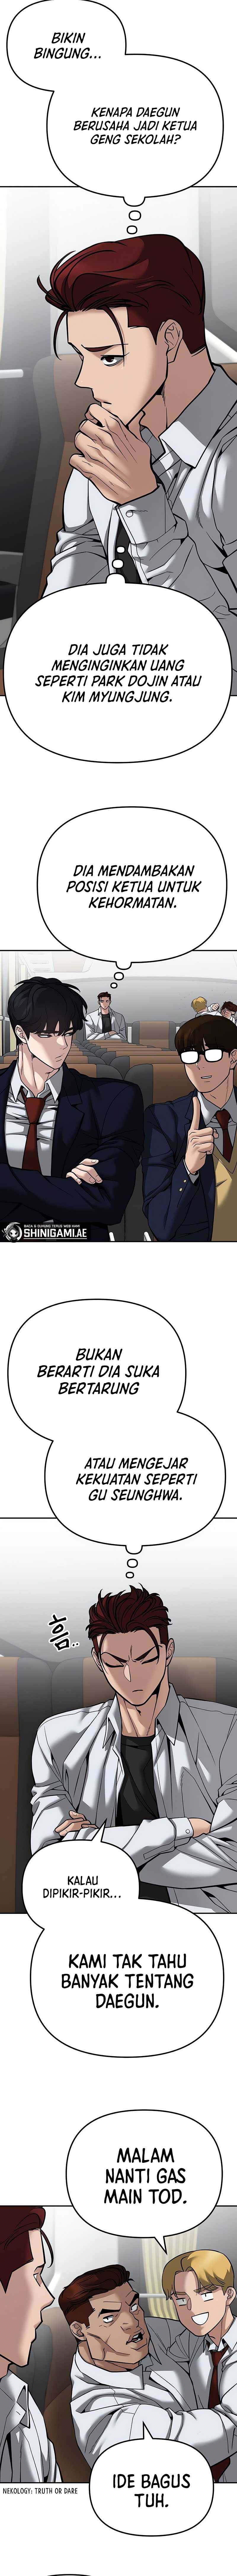 The Bully In Charge Chapter 89